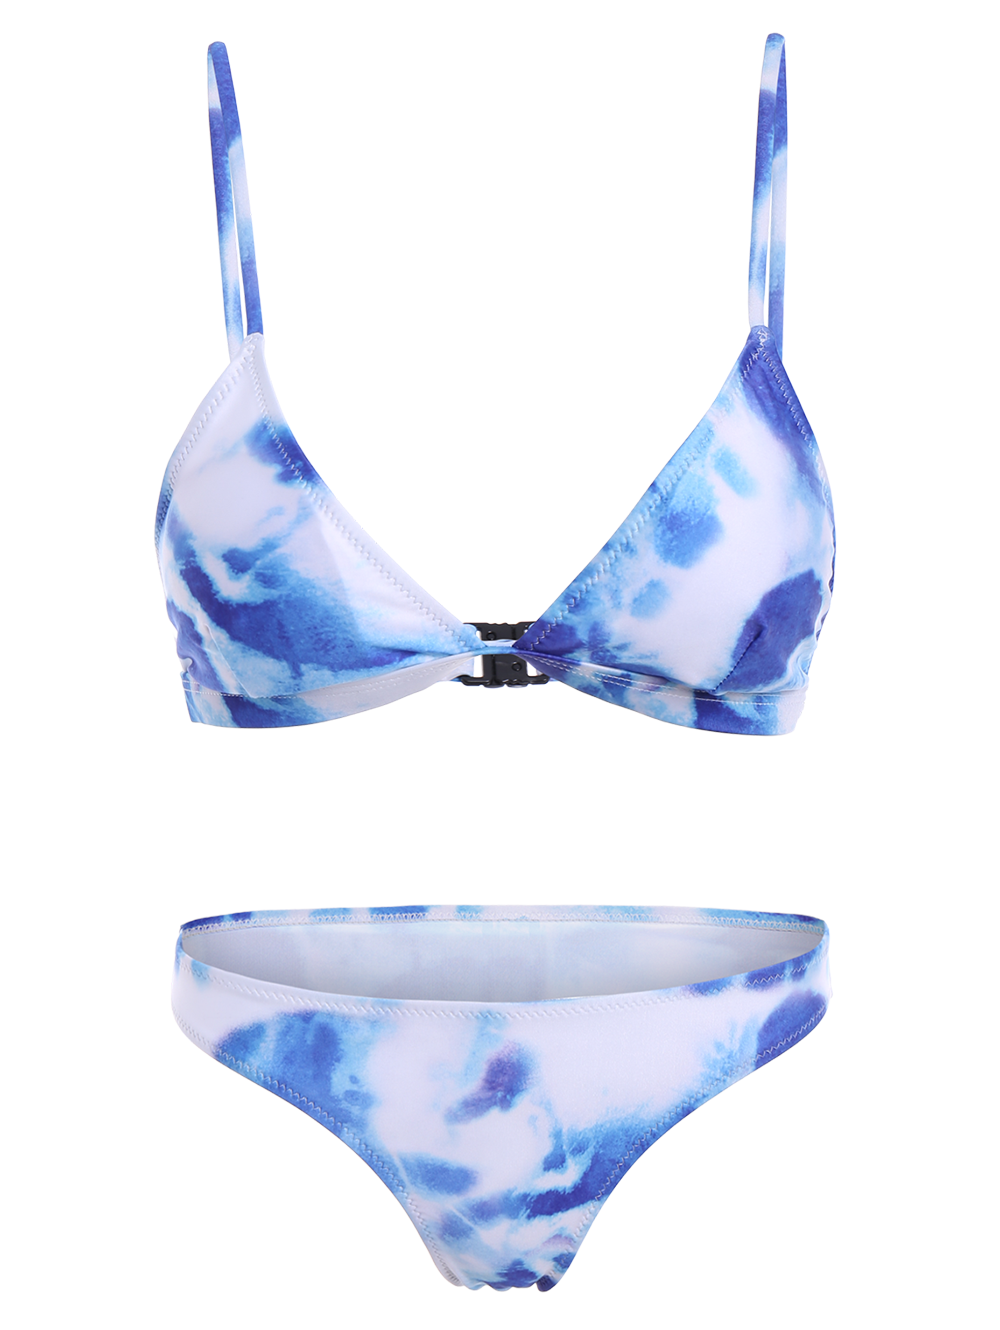 Tie-Dyed Spaghetti Strap Bathing Suit